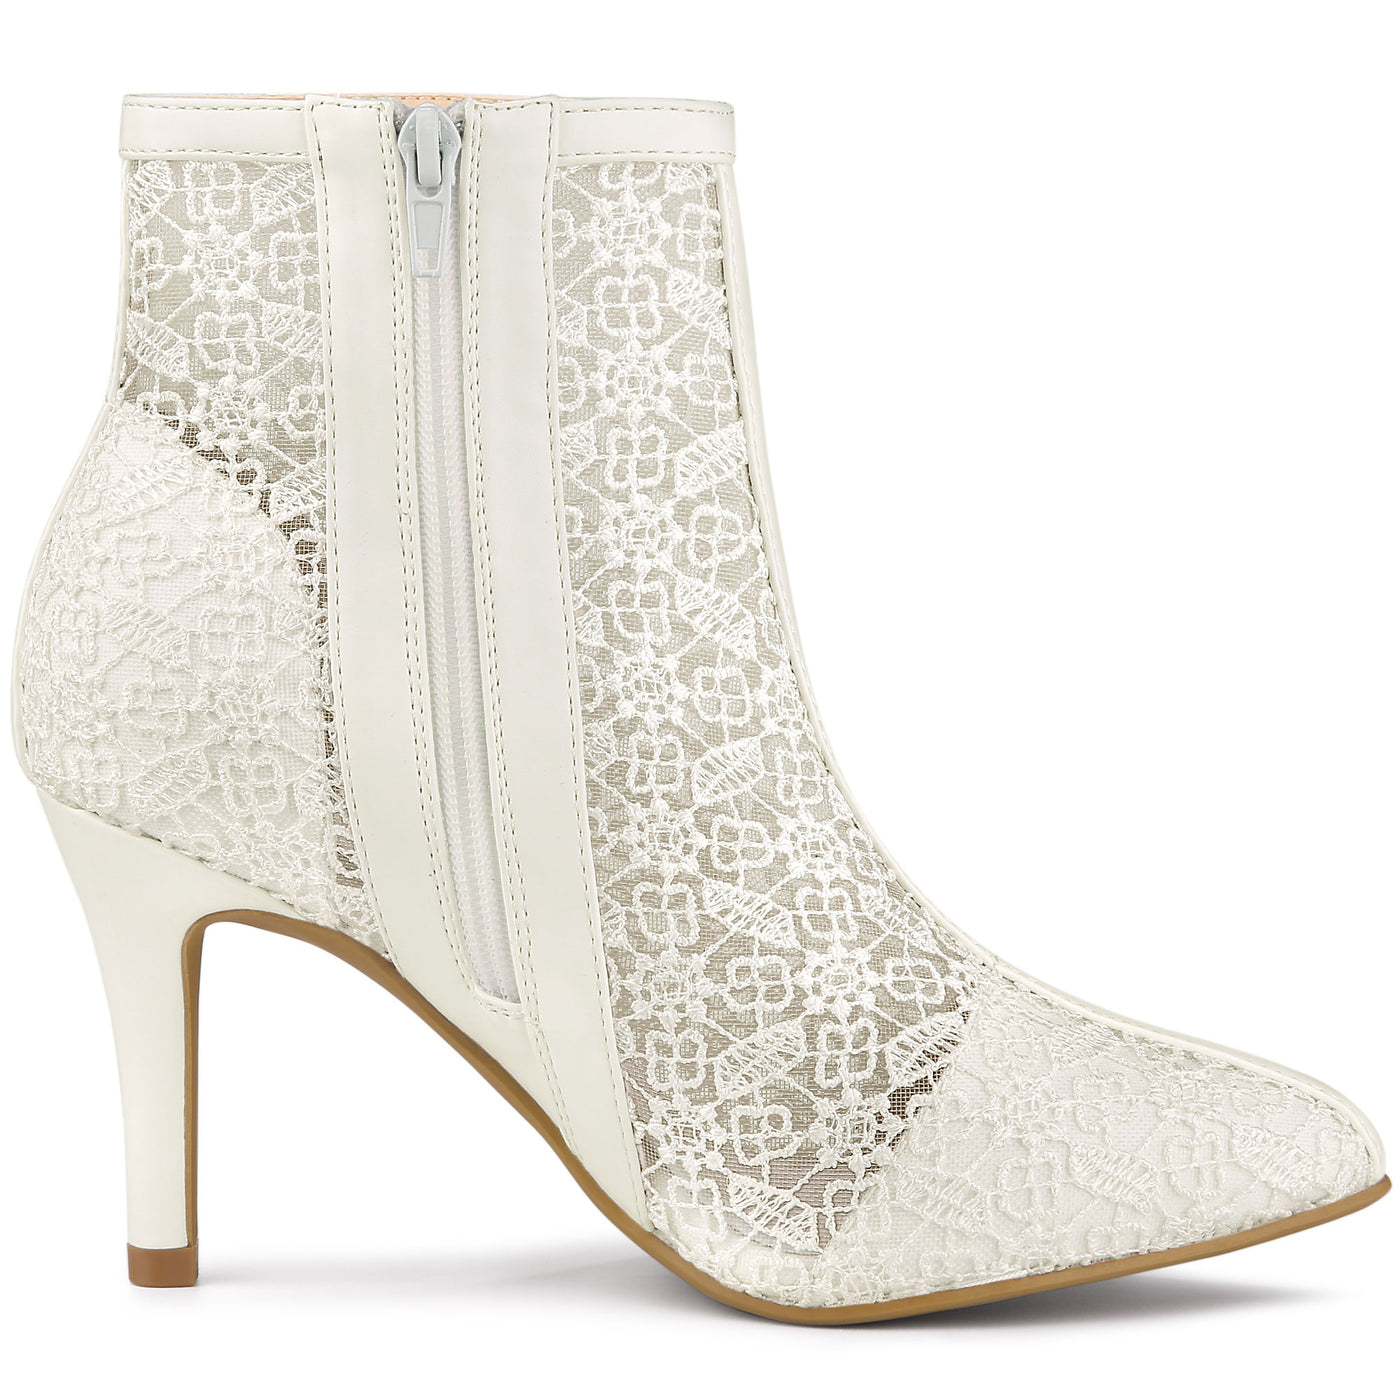 Allegra K Lace Mesh Floral Embroidered Stiletto Heel Ankle Boots